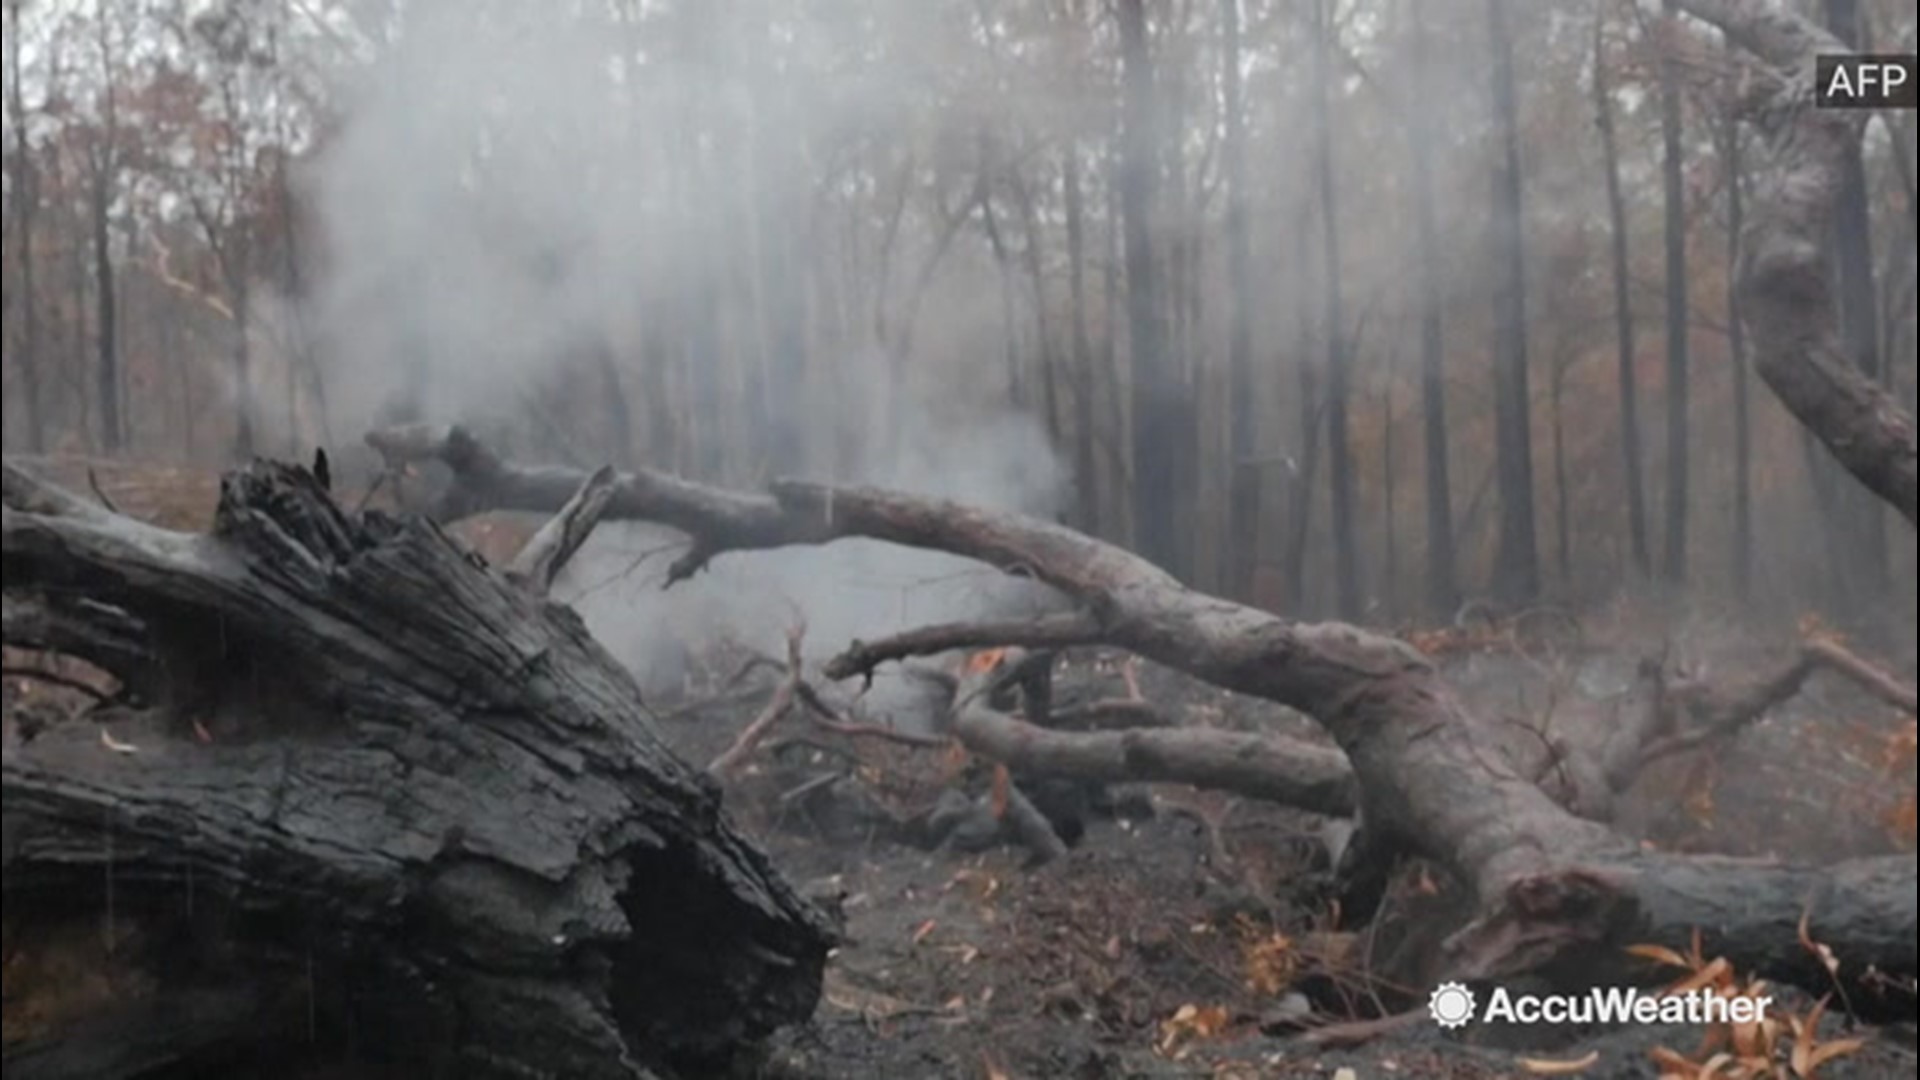 Smoke rose from ashes in Jerrawangala, New South Wales, on Jan. 16, as rain soaked a forest that's been ravaged by a wildfire in recent weeks.